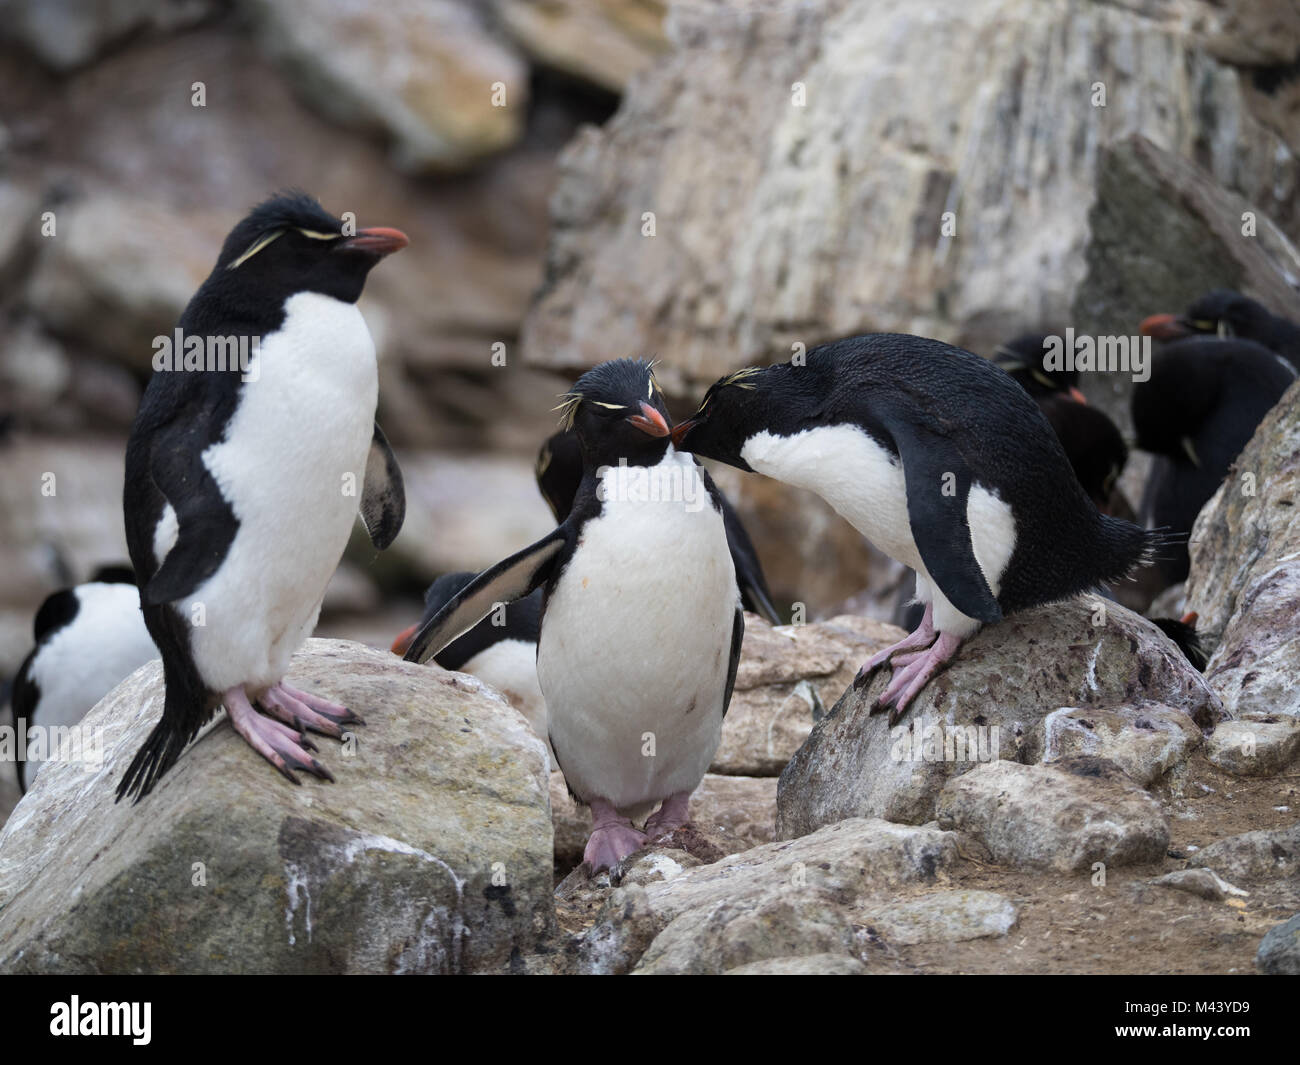 A group of rockhopper penguins standing on a rocky cliff. One penguin is grooming another. Photographed with a shallow depth of field. Stock Photo